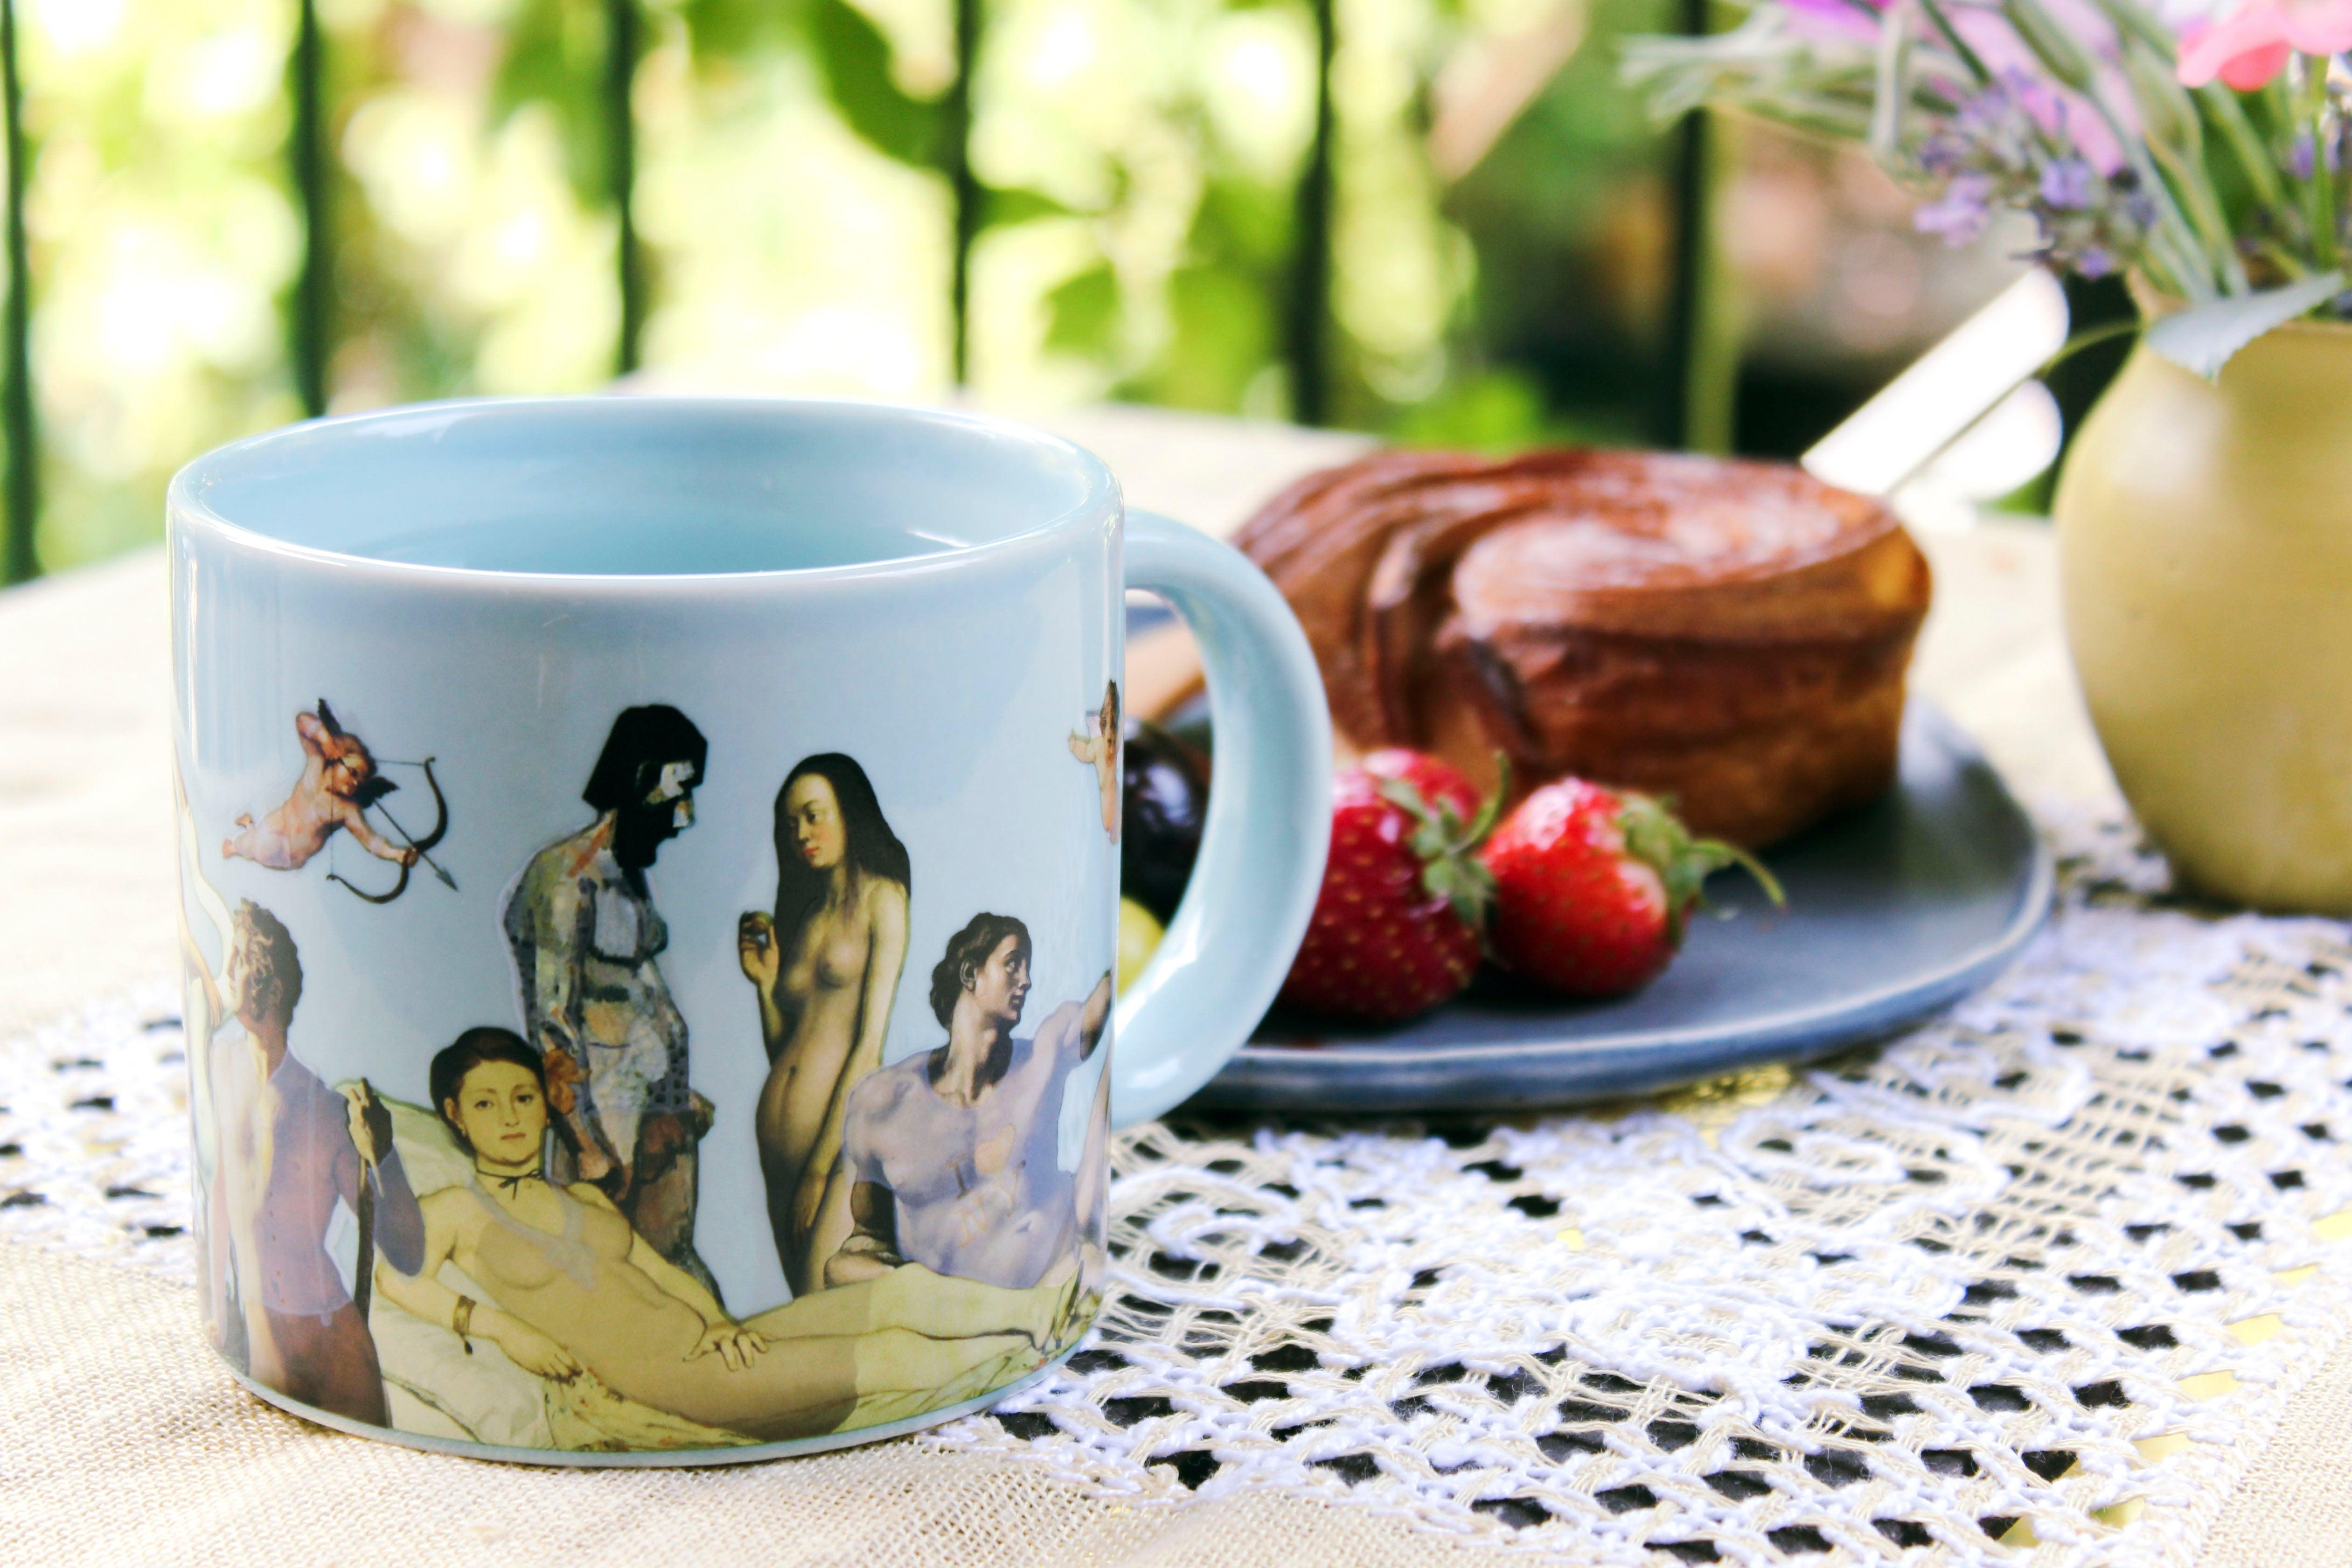 Product photo of Great Nudes of Art Heat-Changing Mug, a novelty gift manufactured by The Unemployed Philosophers Guild.